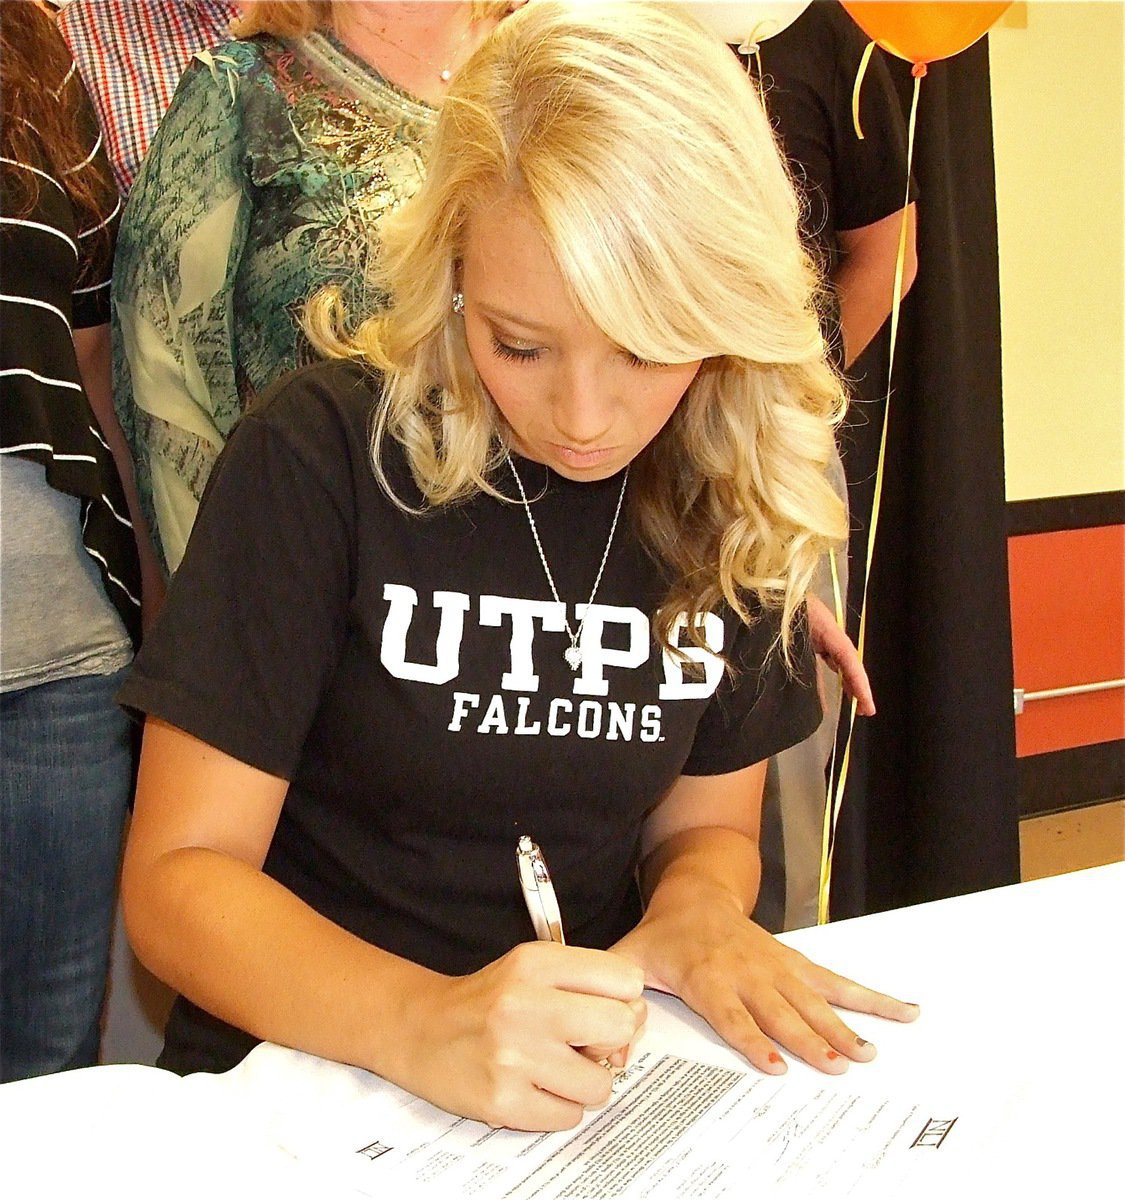 Image: It’s official! Italy’s Megan Richards signs her Letter of Intent to play softball for The University of Texas at the Permian Basin in Odessa while surrounded by proud family members and friends.